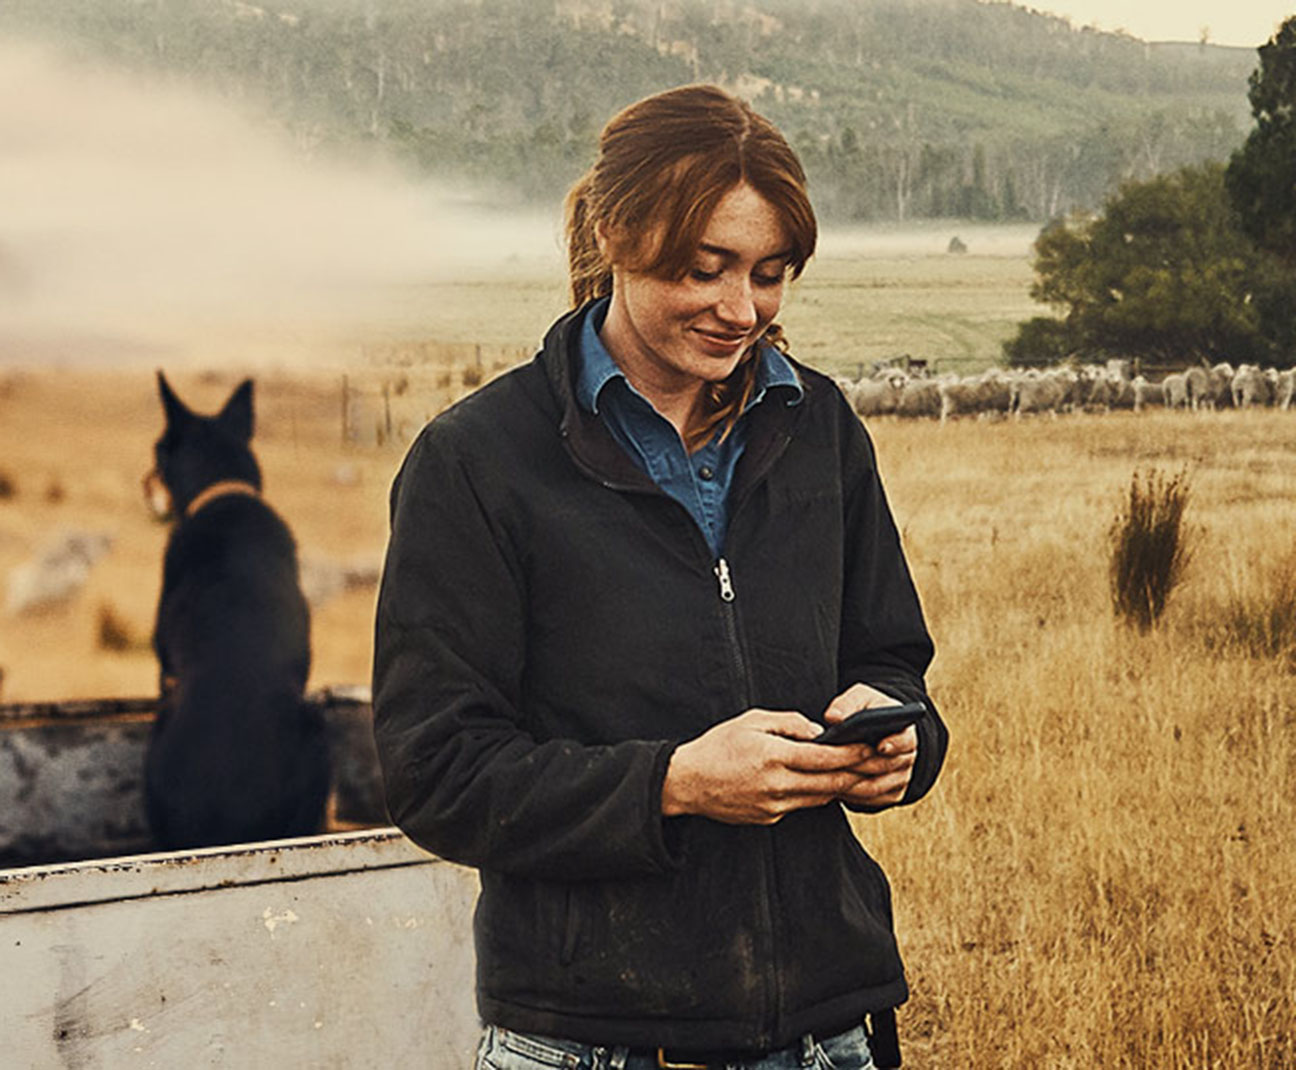 woman on her phone on a farm